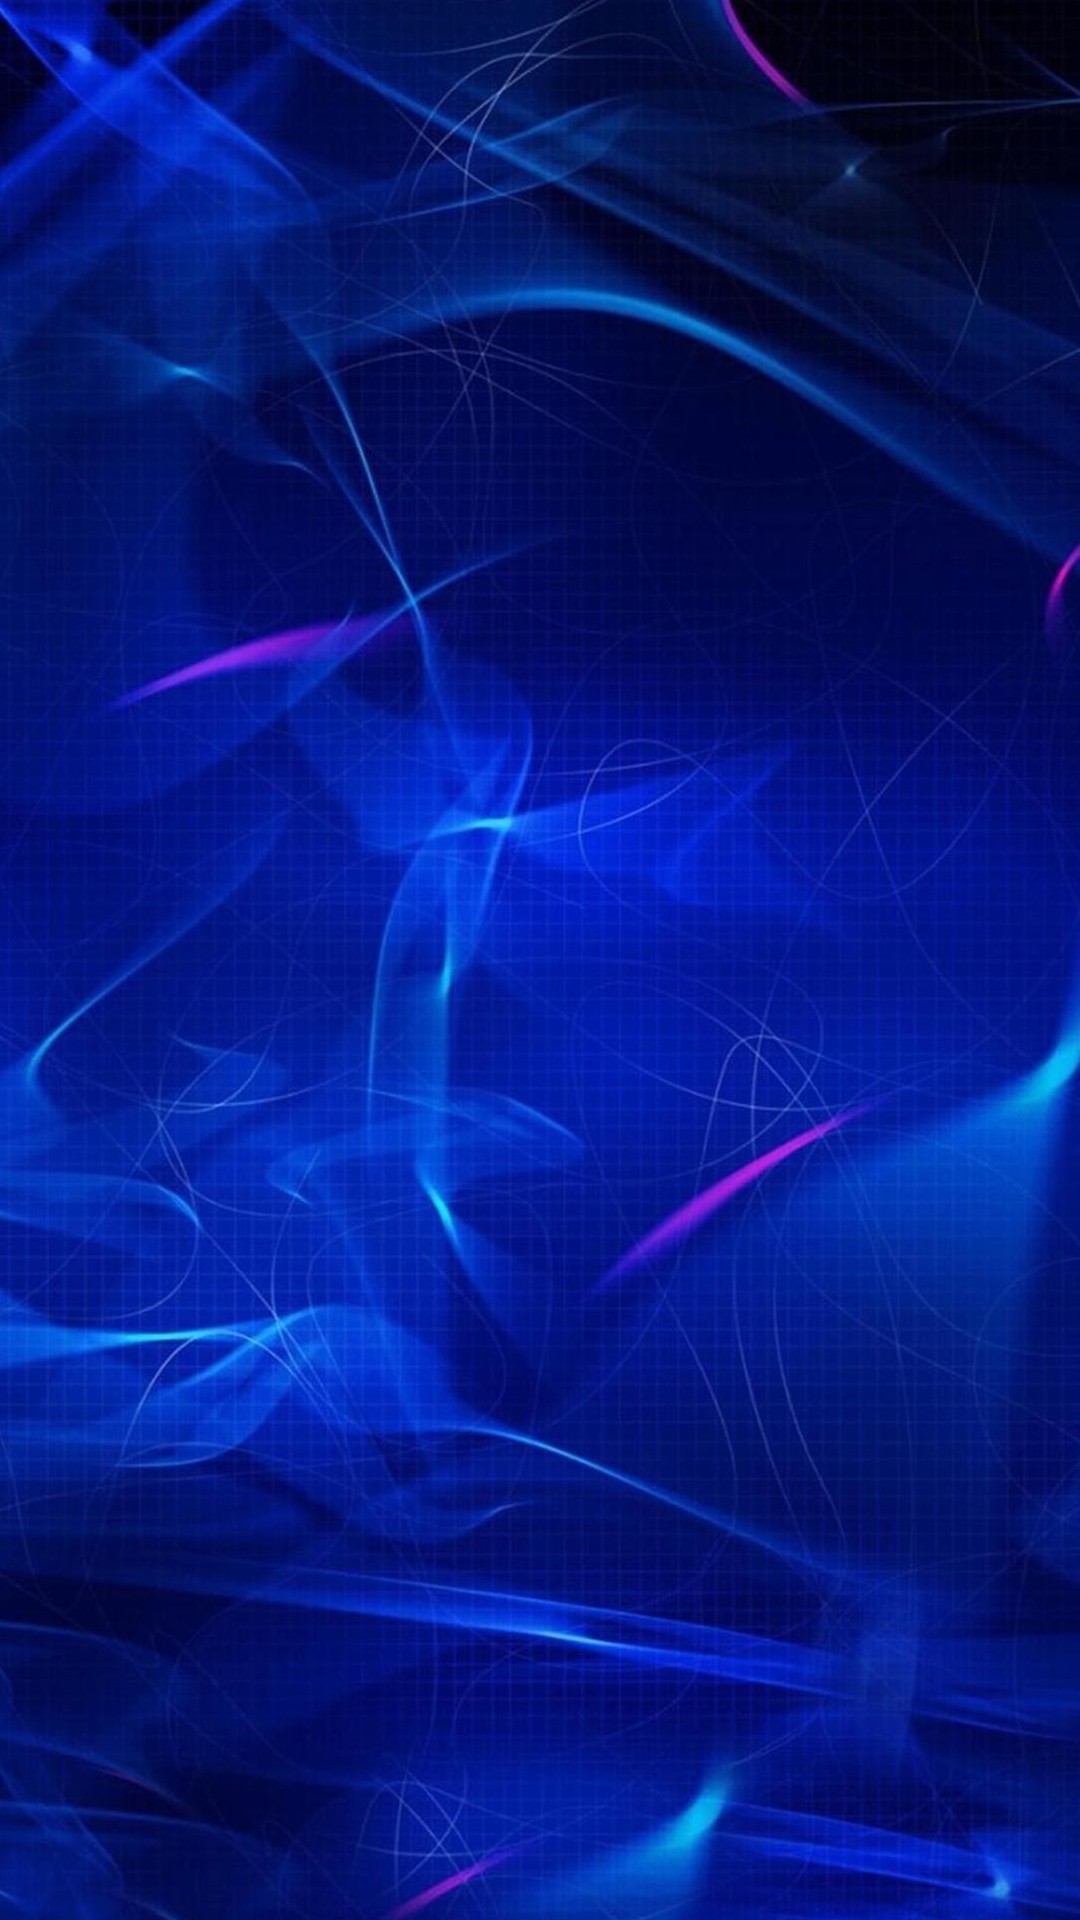 Abstract Xperia Z Wallpapers Hd 177 Xperia Z1 Zl Wallpapers And Backgrounds Iphone14 スマホ壁紙 待受画像ギャラリー